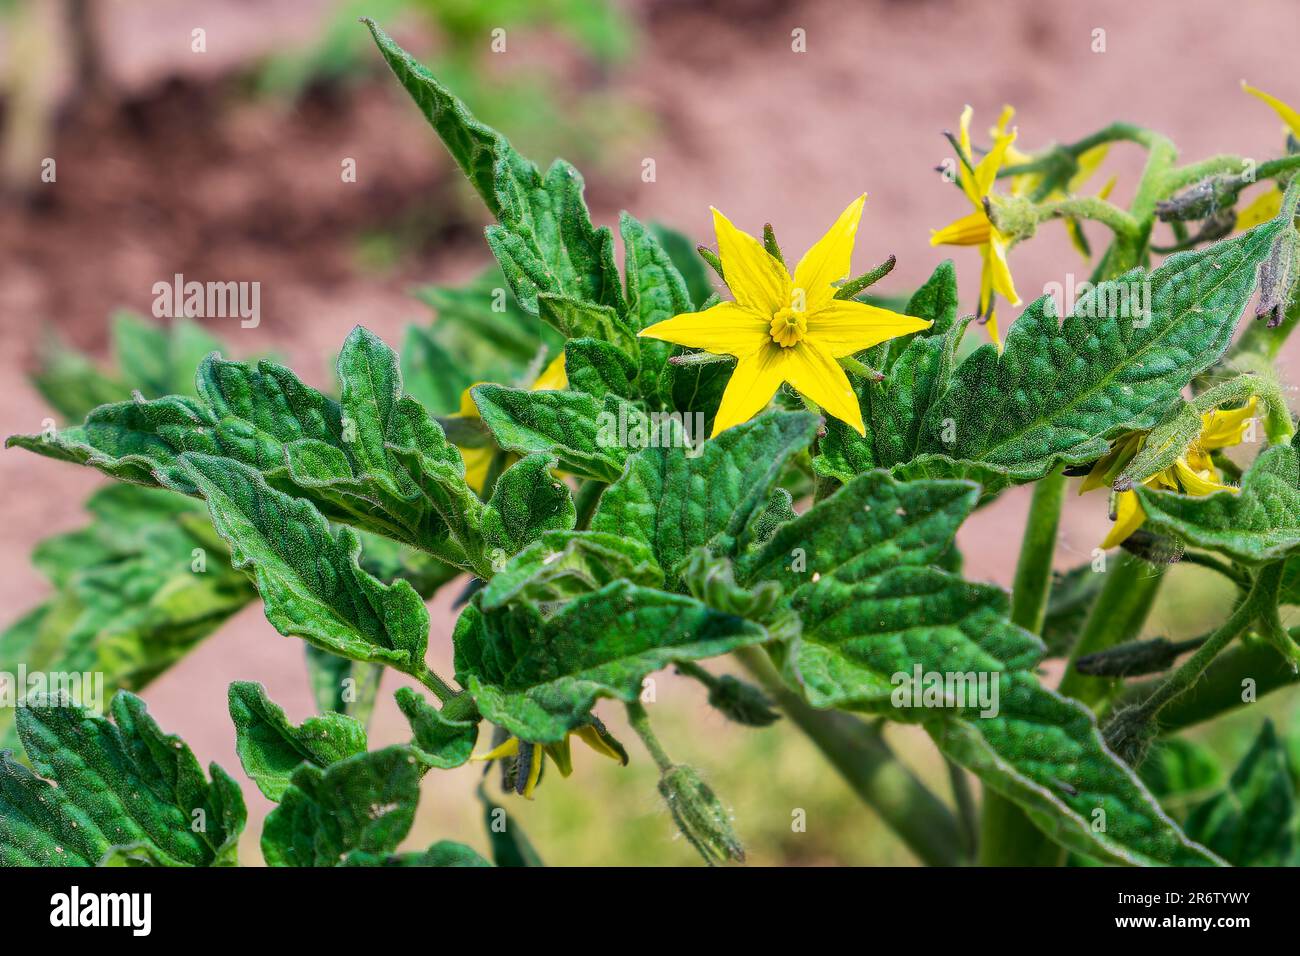 Tomato blossoms. Close-up view of the yellow flower and green foliage Stock Photo